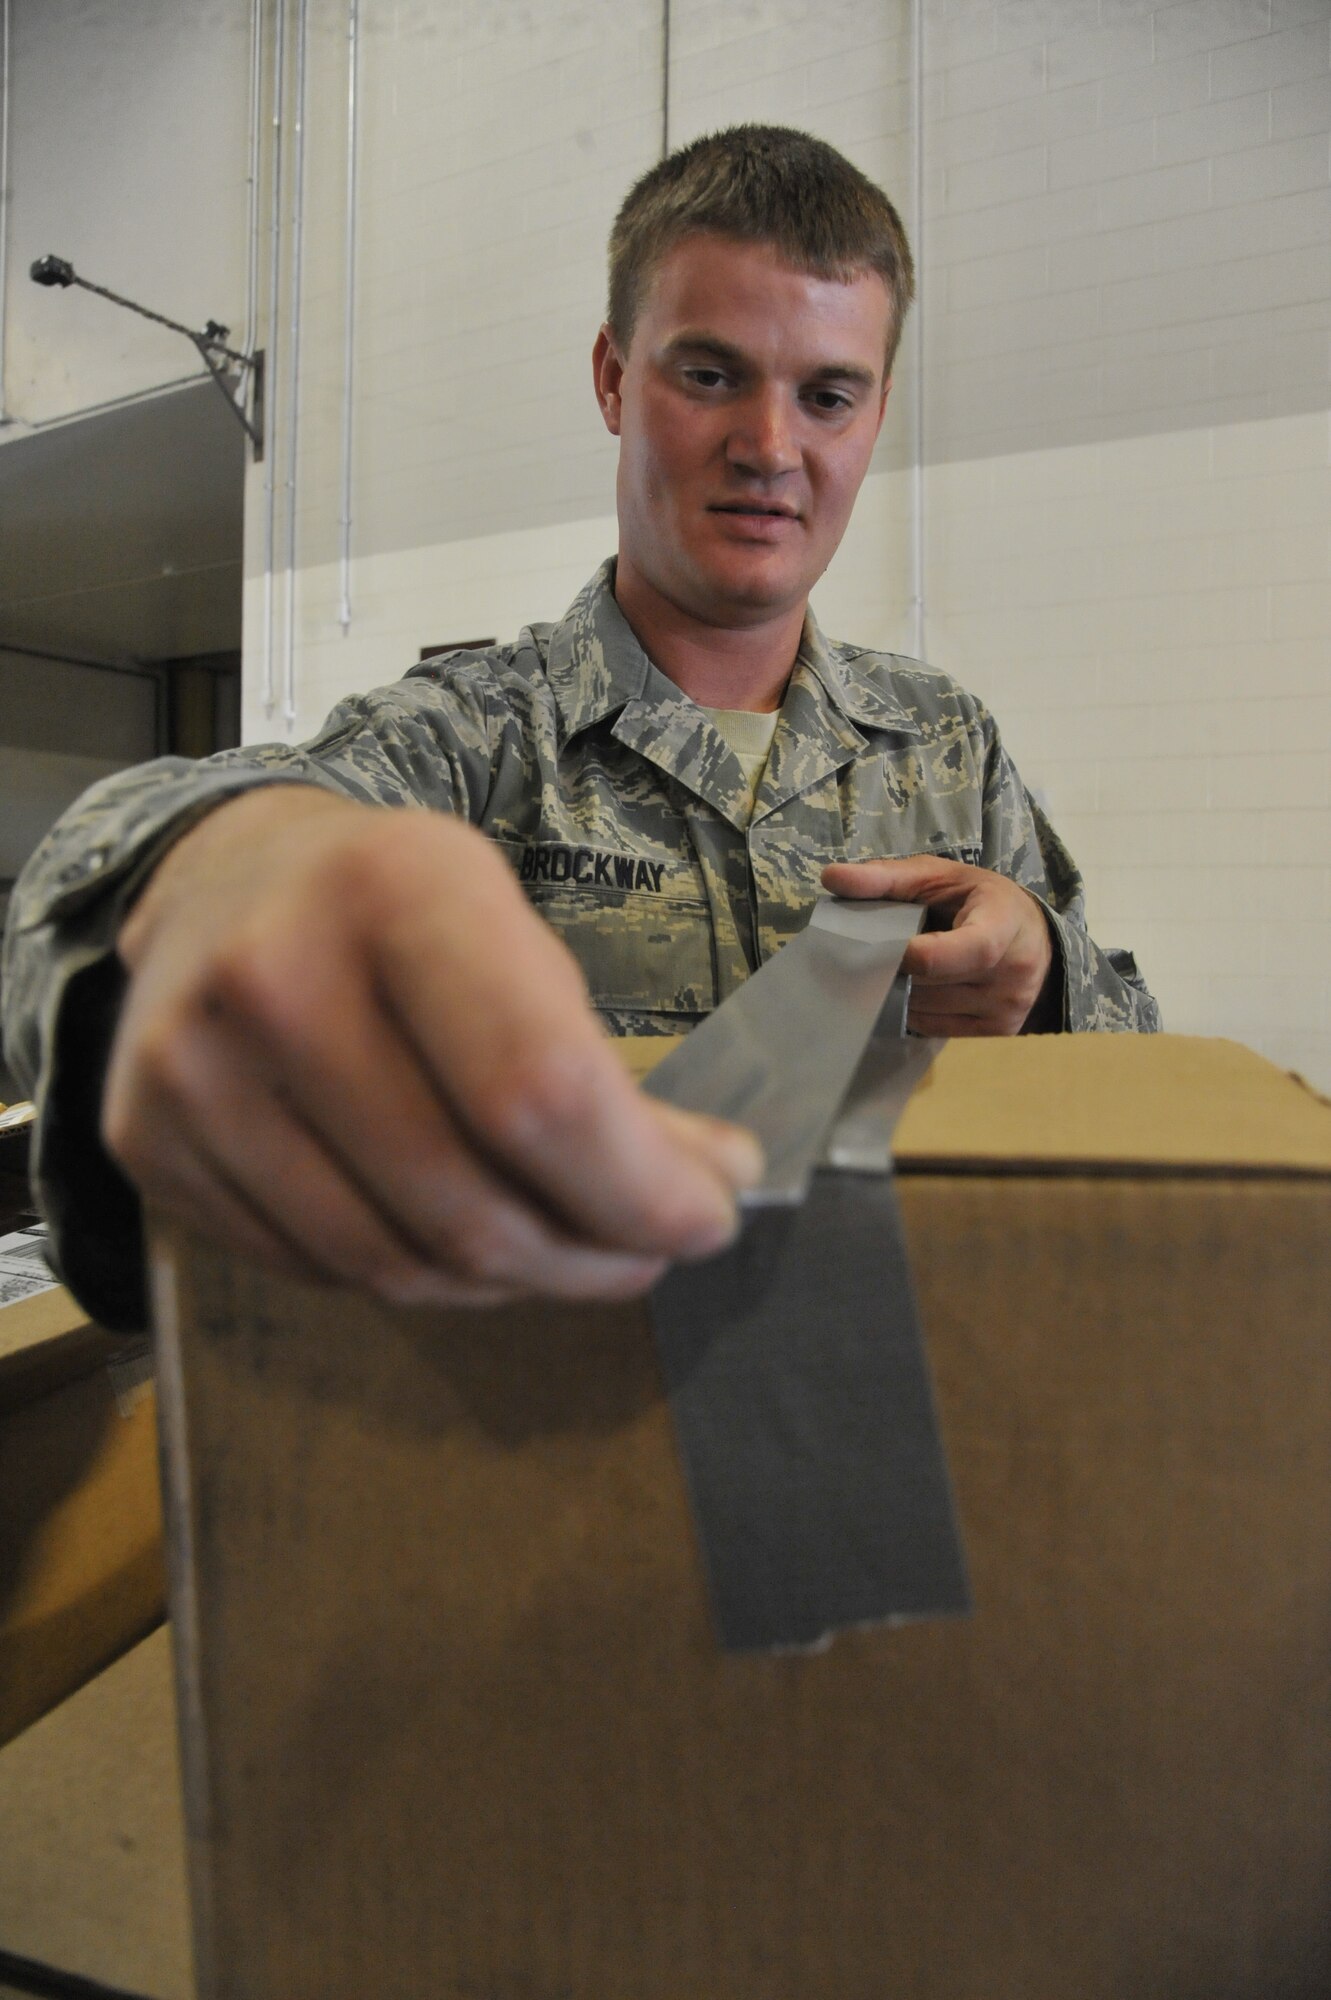 U.S. Air Force Staff Sgt. Chris Brockway, 442nd Logistics Readiness Squadron traffic management apprentice, tapes a package at Whiteman Air Force Base, Mo., Sept. 23, 2013. All packages must be secured and delivered to the customer in a timely manner. (U.S. Air Force photo by Airman 1st Class Keenan Berry/Released)